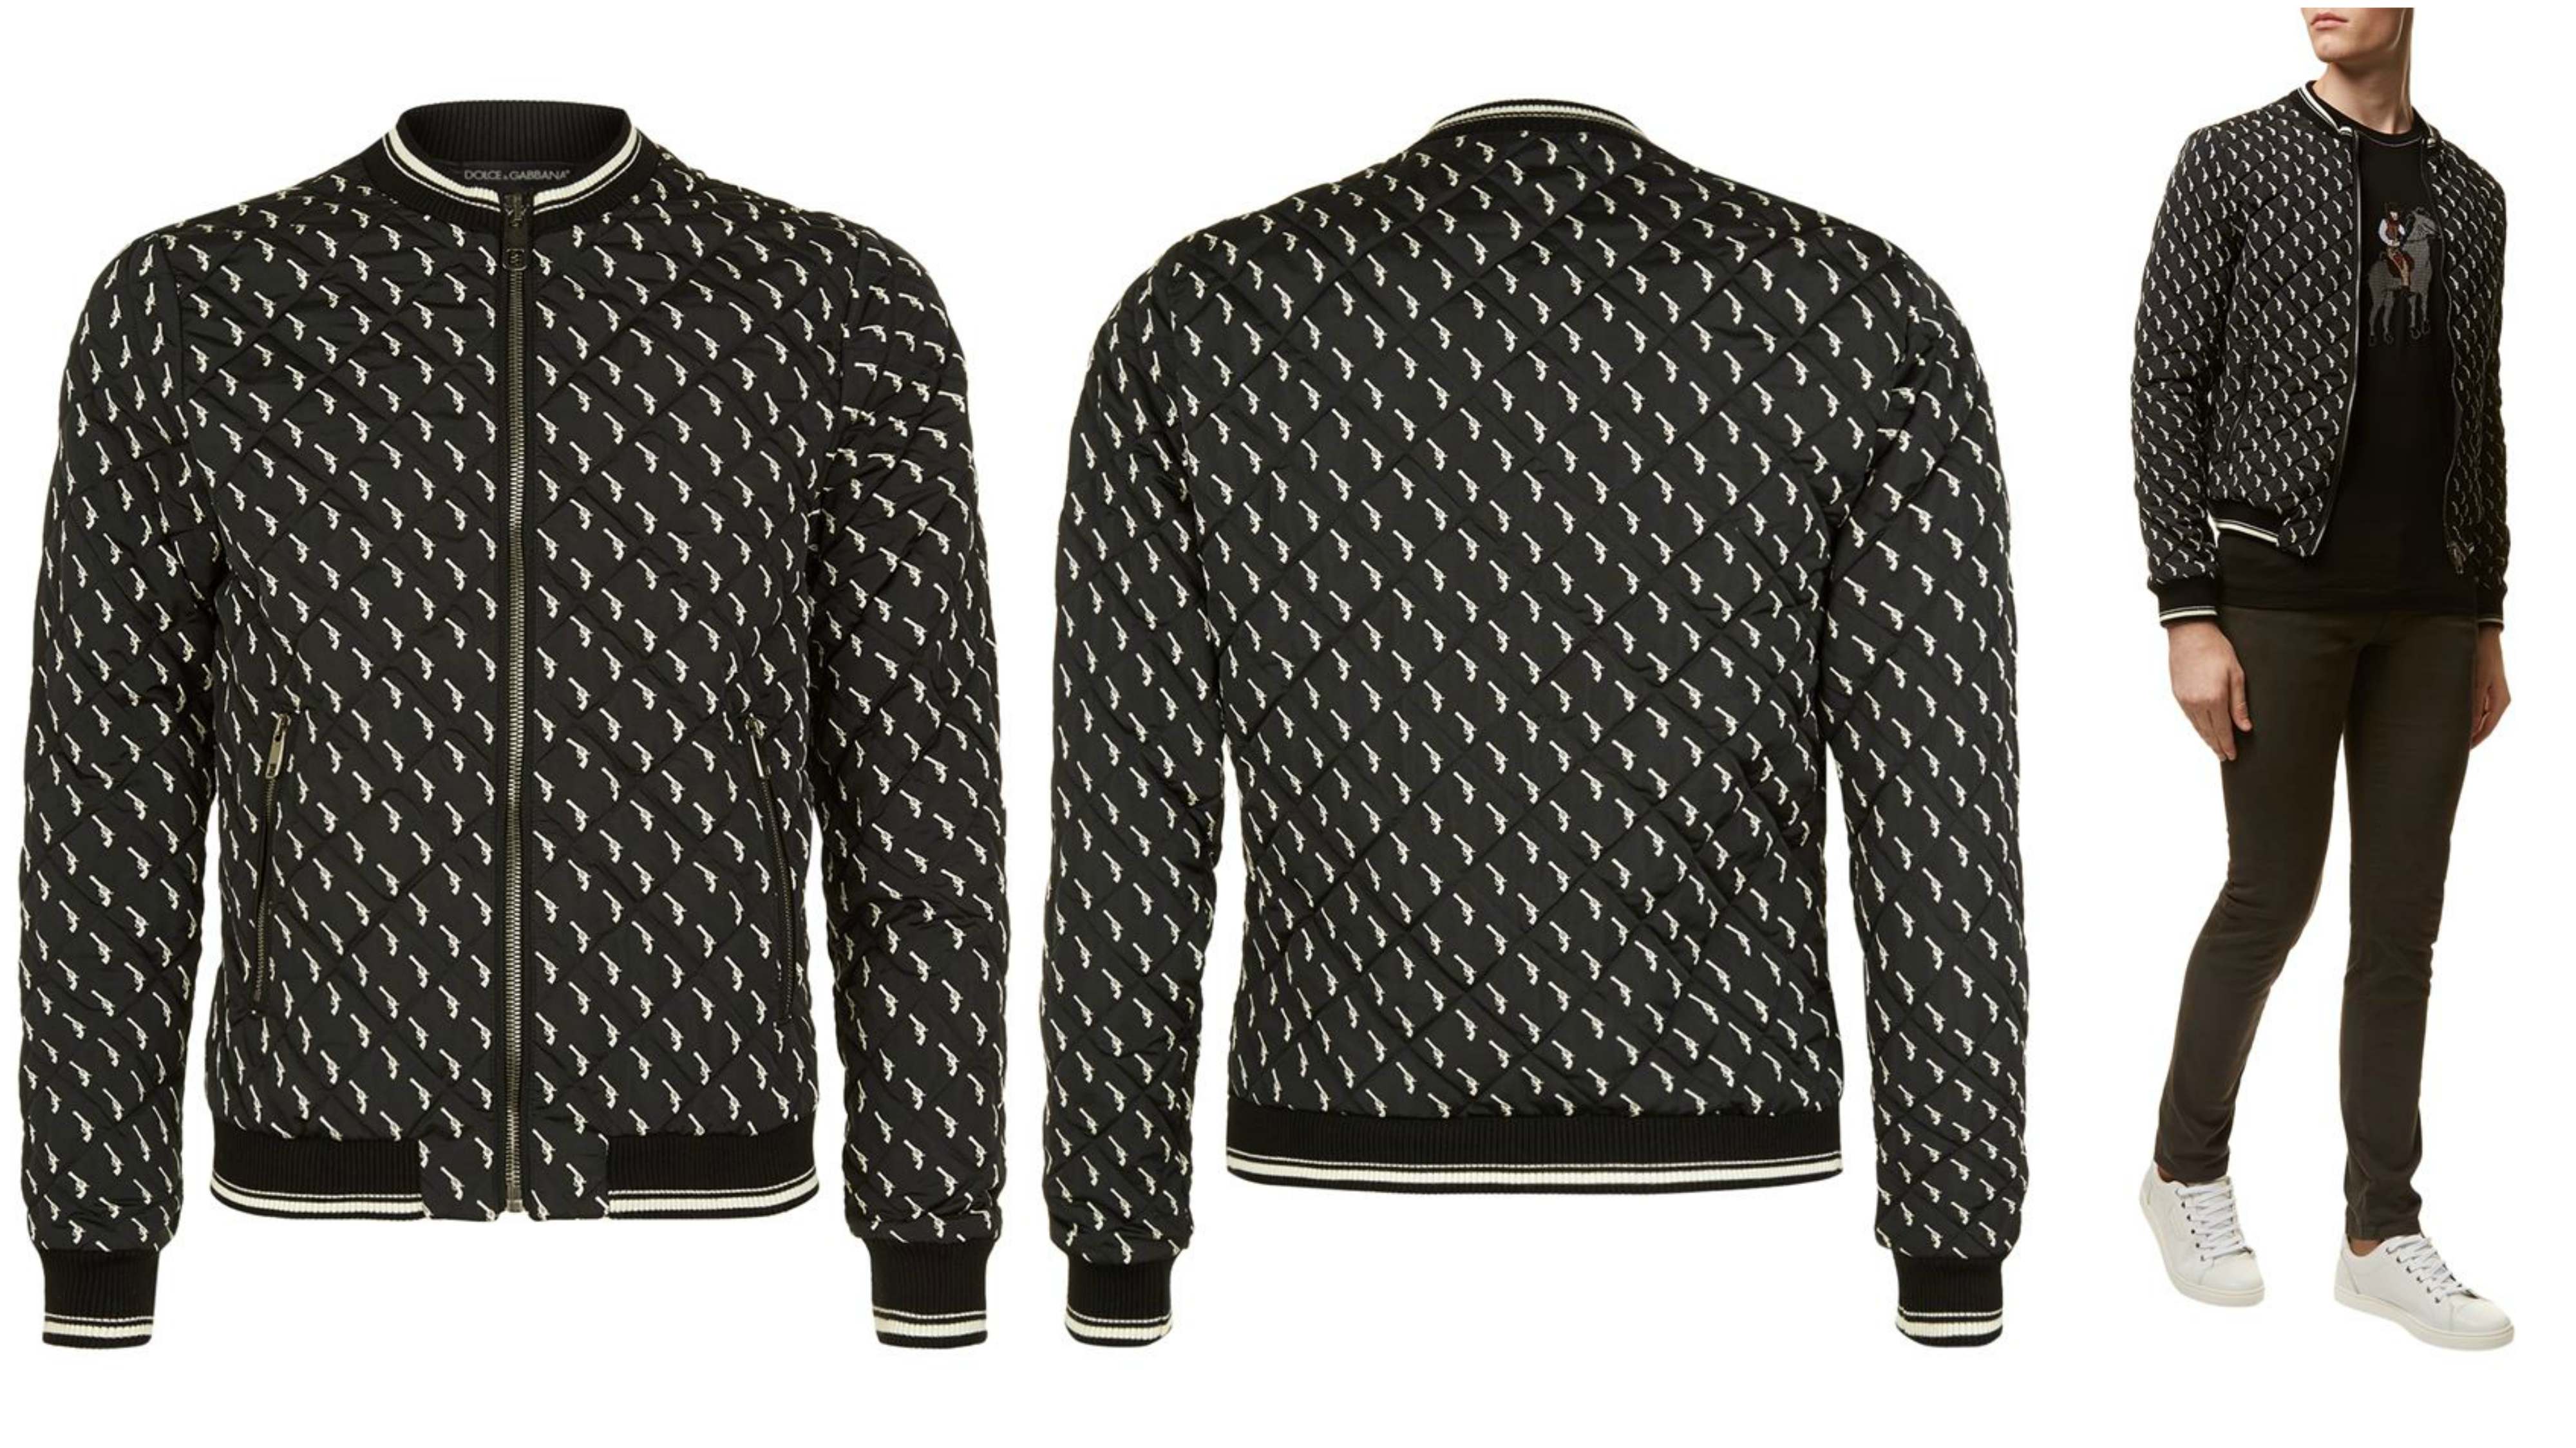 Dolce & Gabbana Pistol Print Quilted Bomber Jacket - Férfidivat